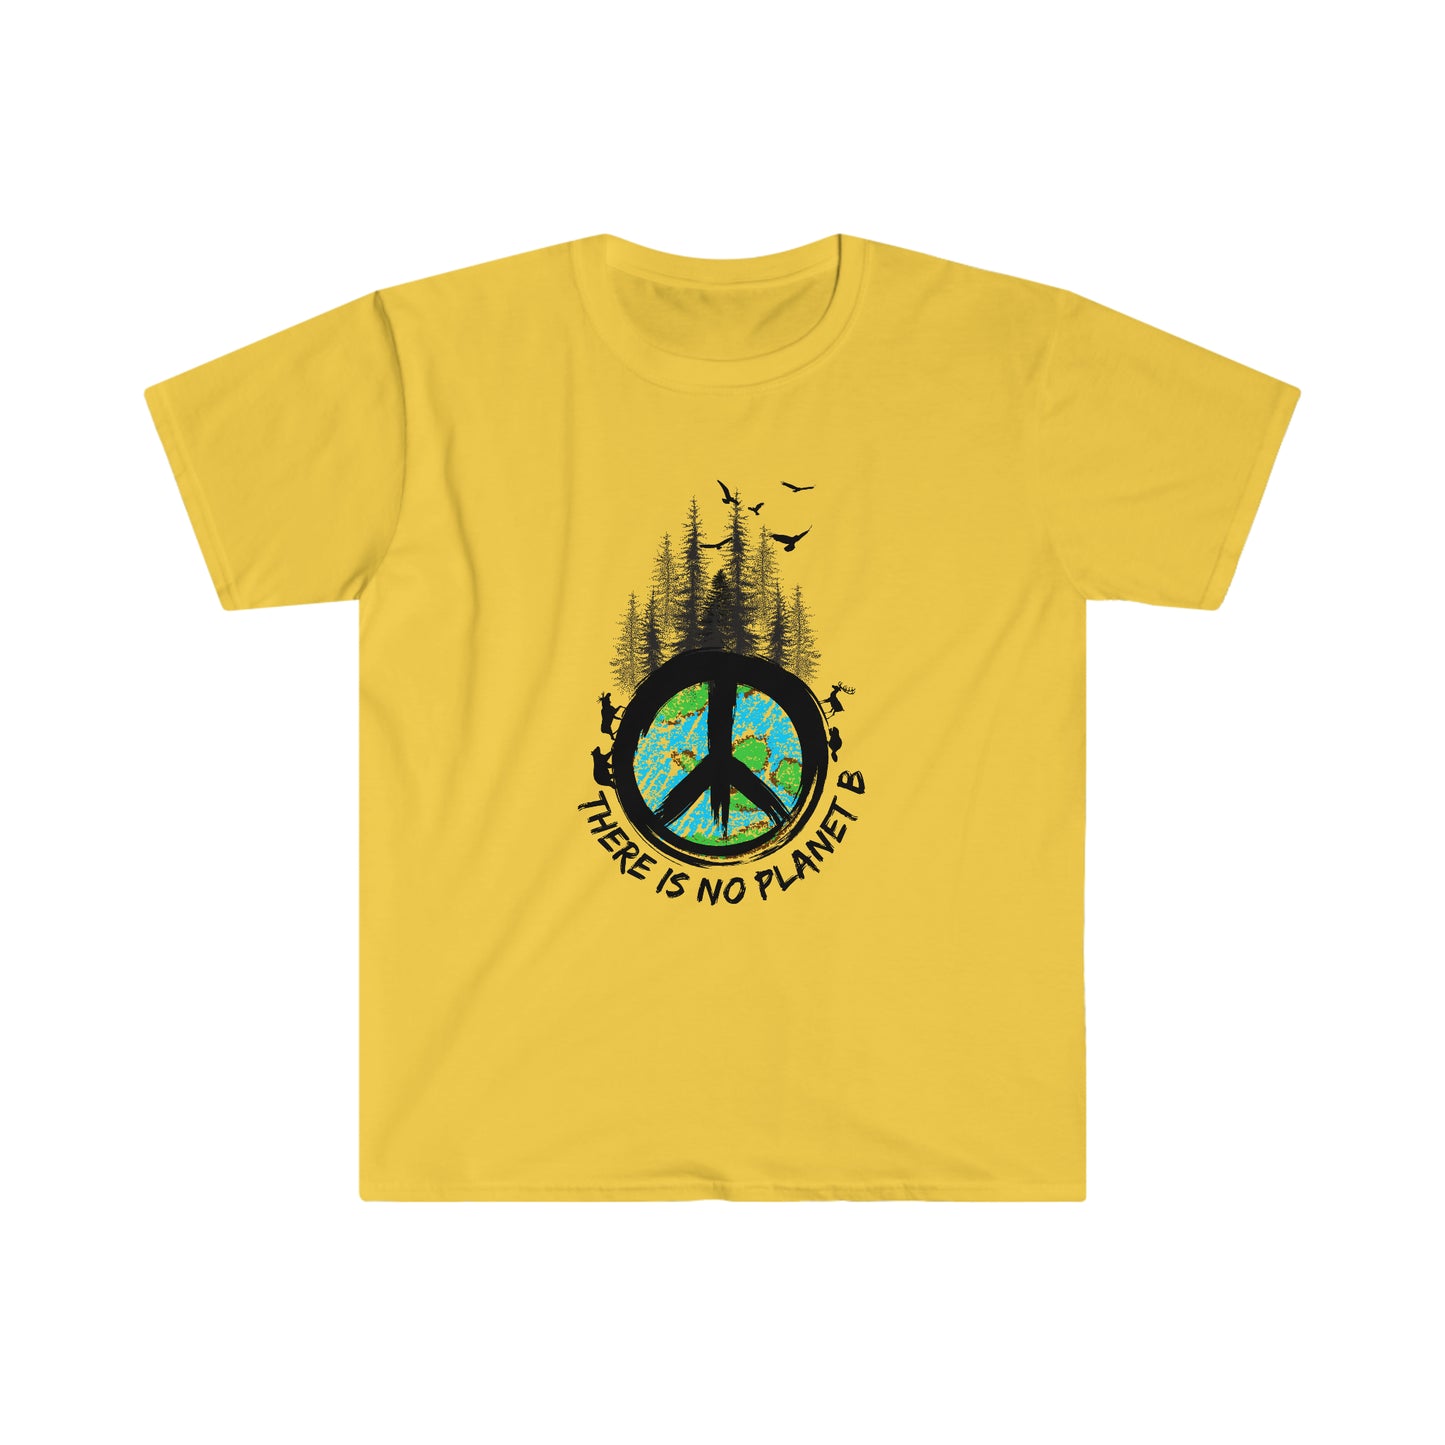 Theres No Planet B - Mother Earth - Urban Camper